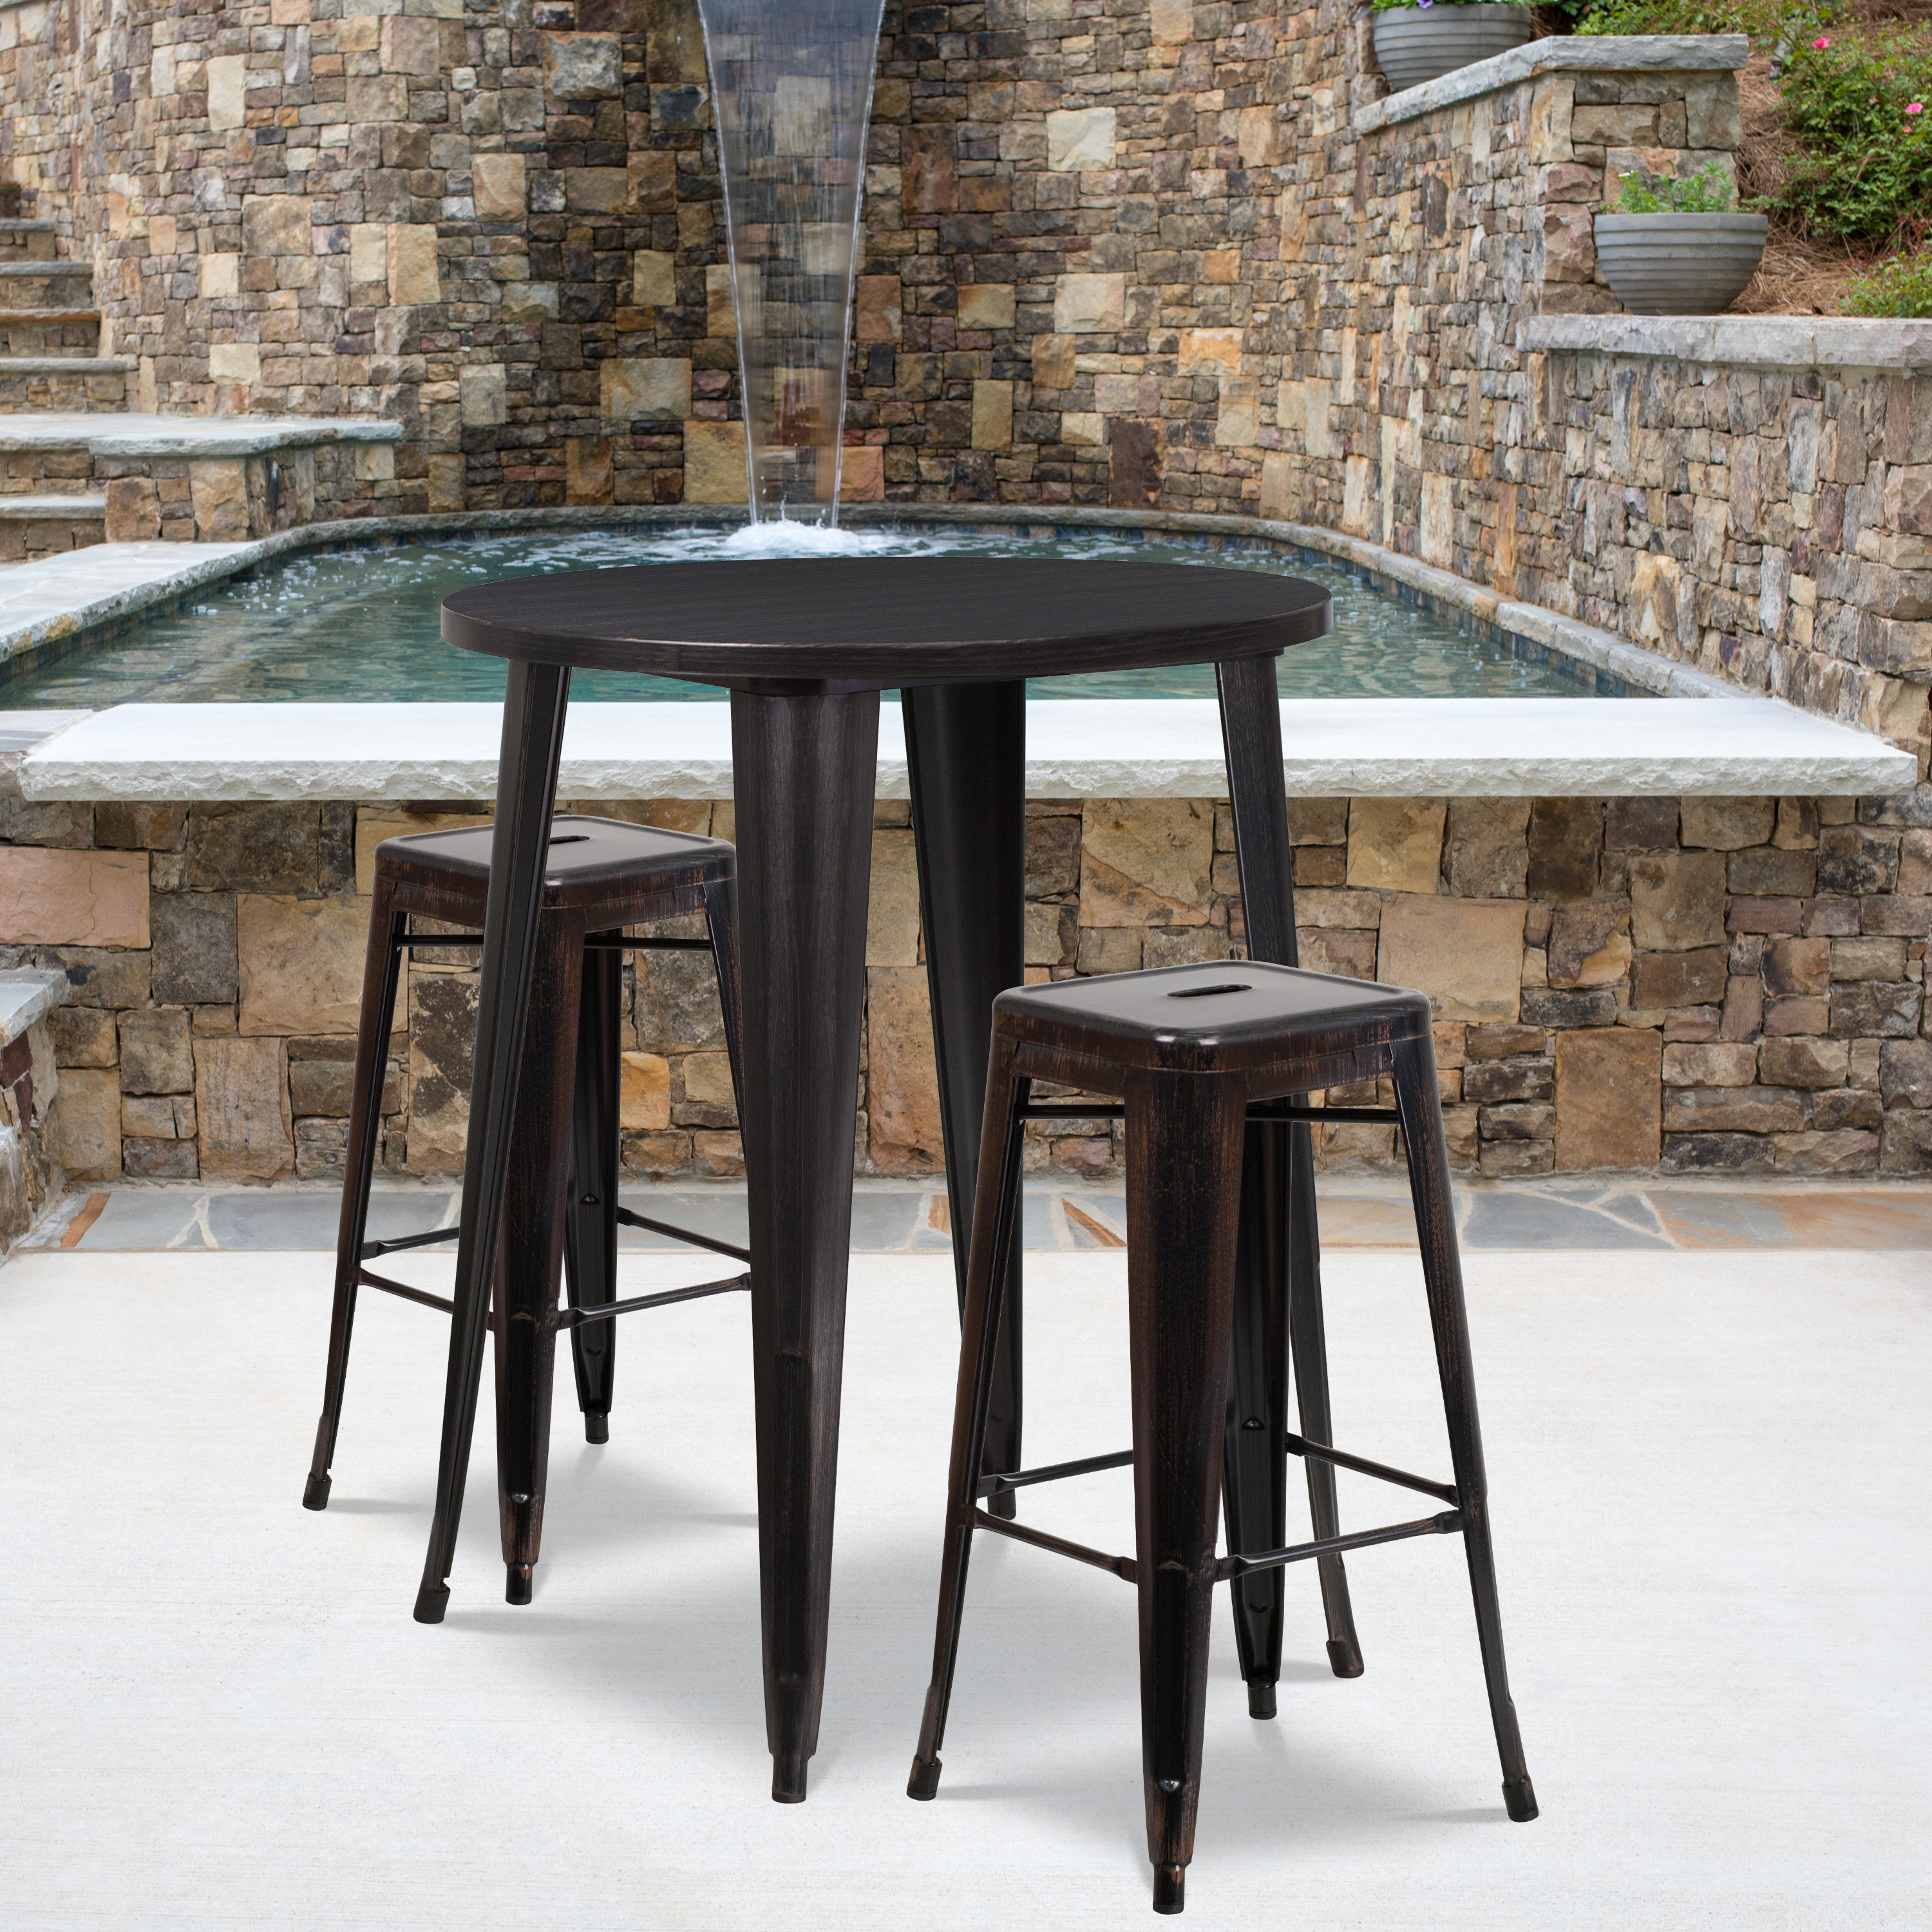 Flash Furniture Boyd Commercial Grade 30" Round Black-Antique Gold Metal Indoor-Outdoor Bar Table Set with 2 Square Seat Backless Stools - image 2 of 5